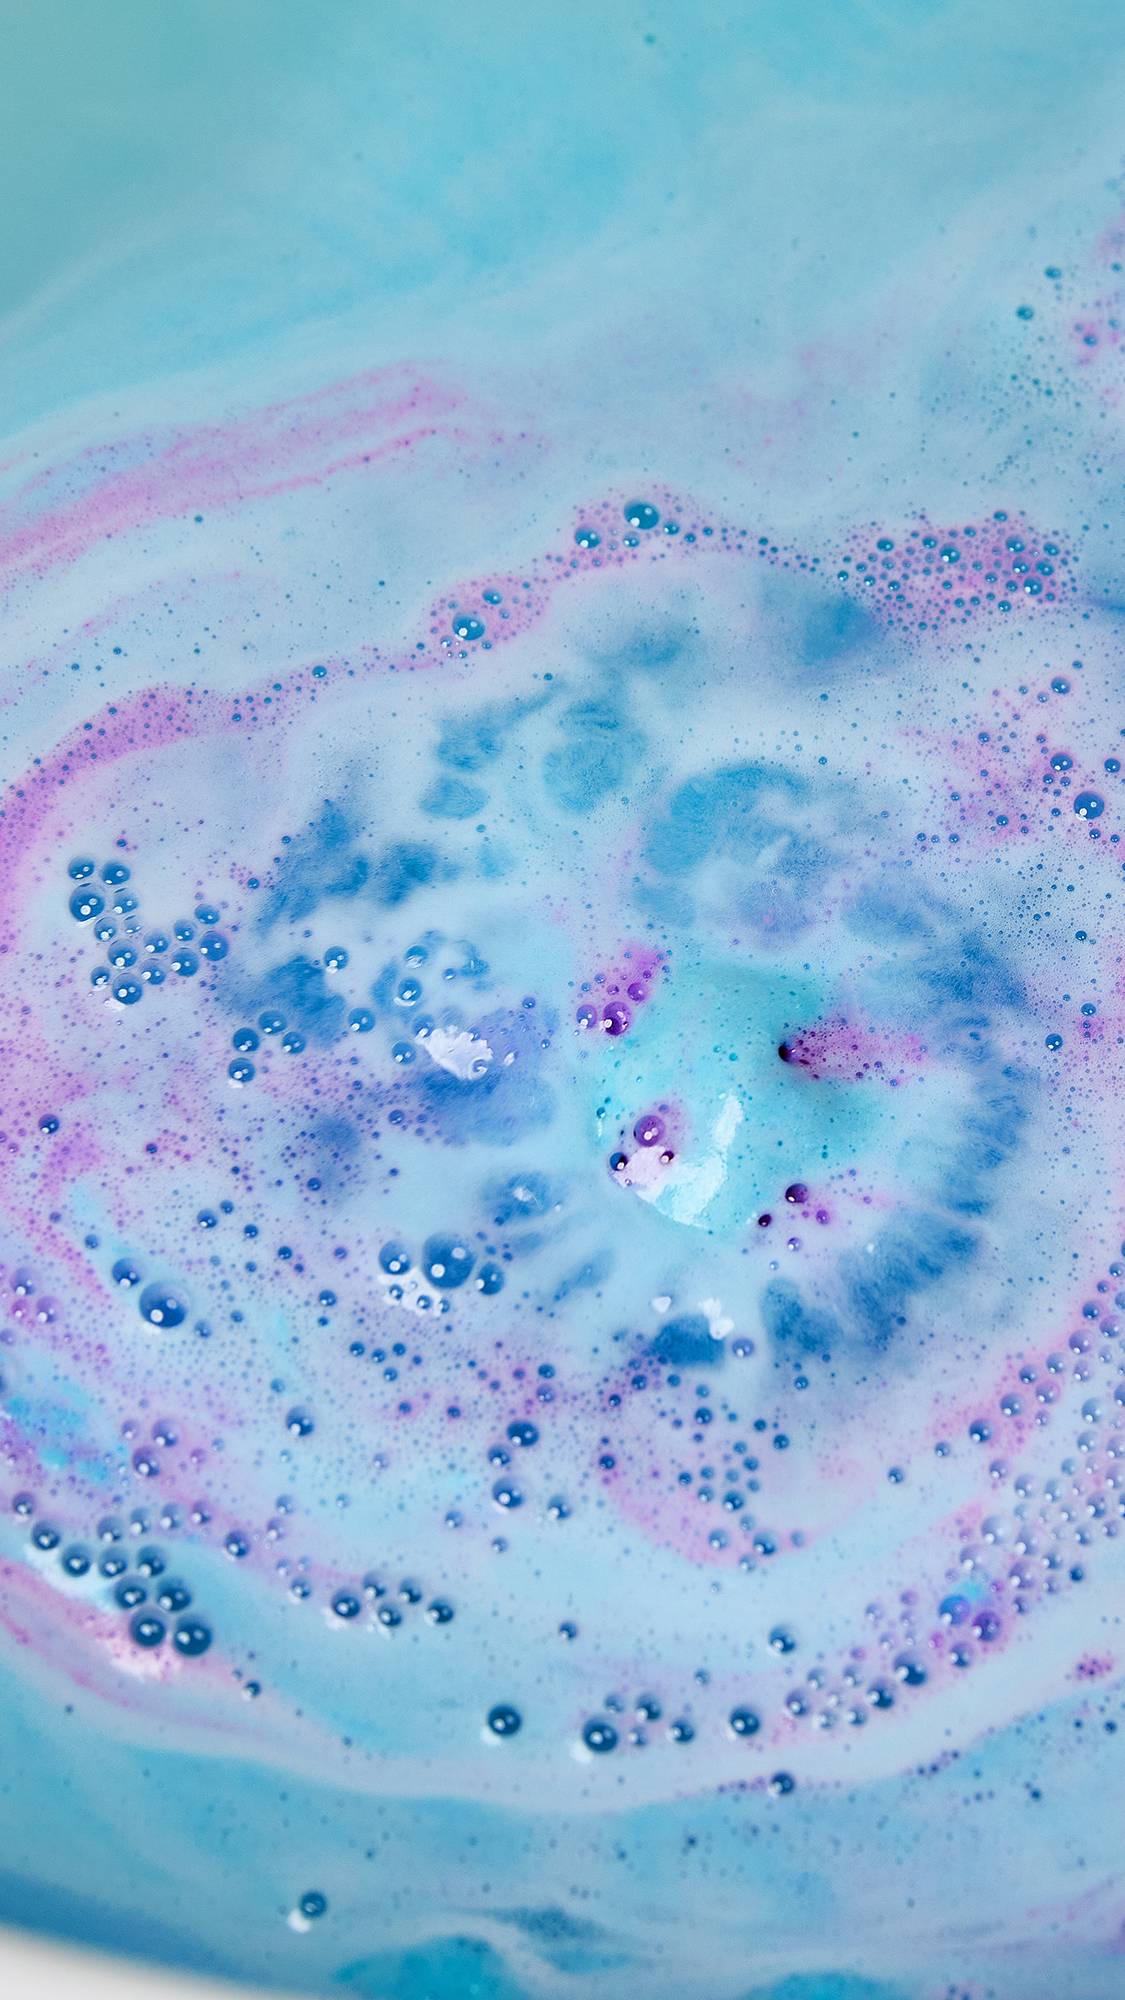 The Bunny Moon bath bomb has nearly fully dissolved erupting in a bright blue foam with flashes of pink and purple.